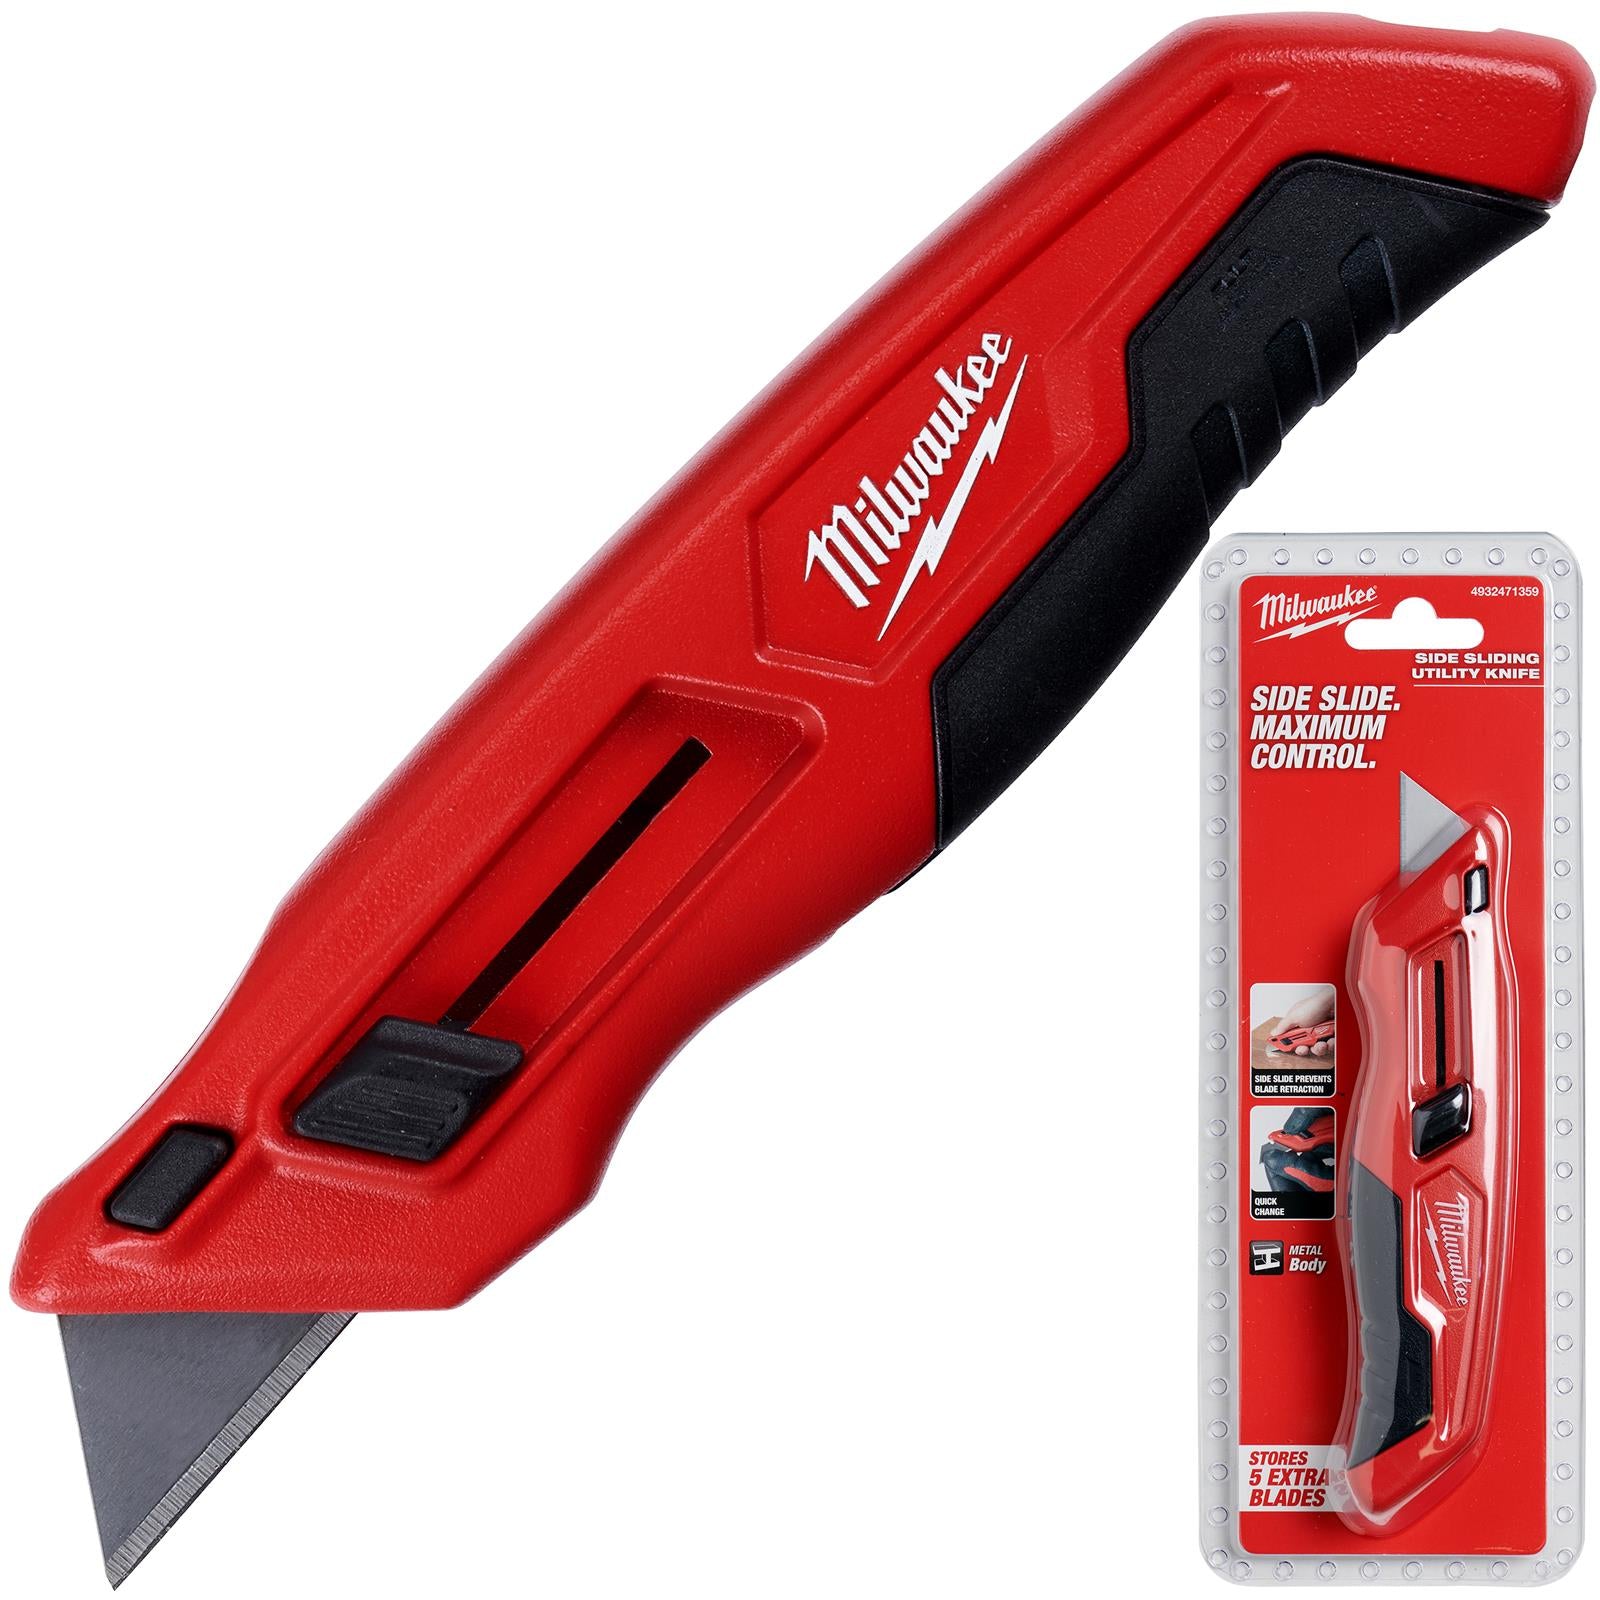 Milwaukee Sliding Retractable Utility Knife Blade Cutter Cutting